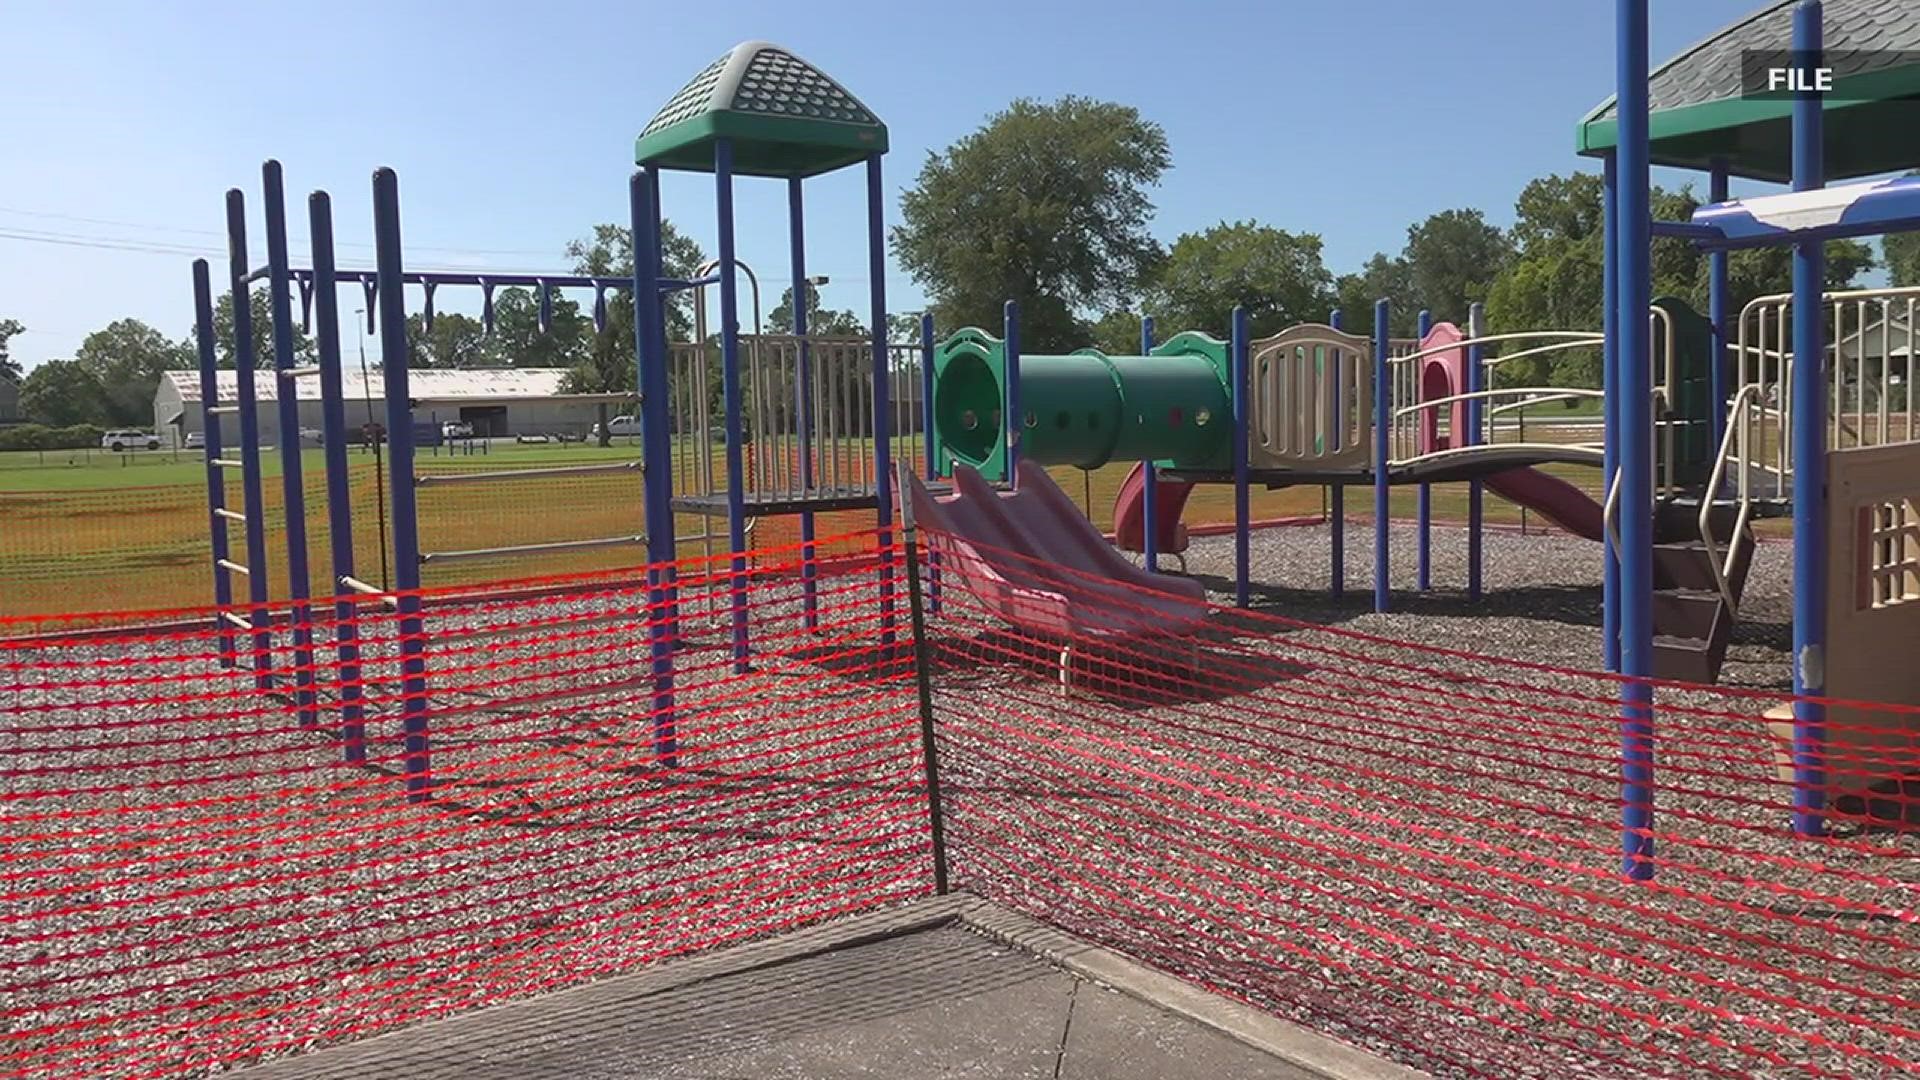 12News first reported parents concerns about the park last year. The Beaumont Park had rusty equipment, exposed wood and moldy splash pads.